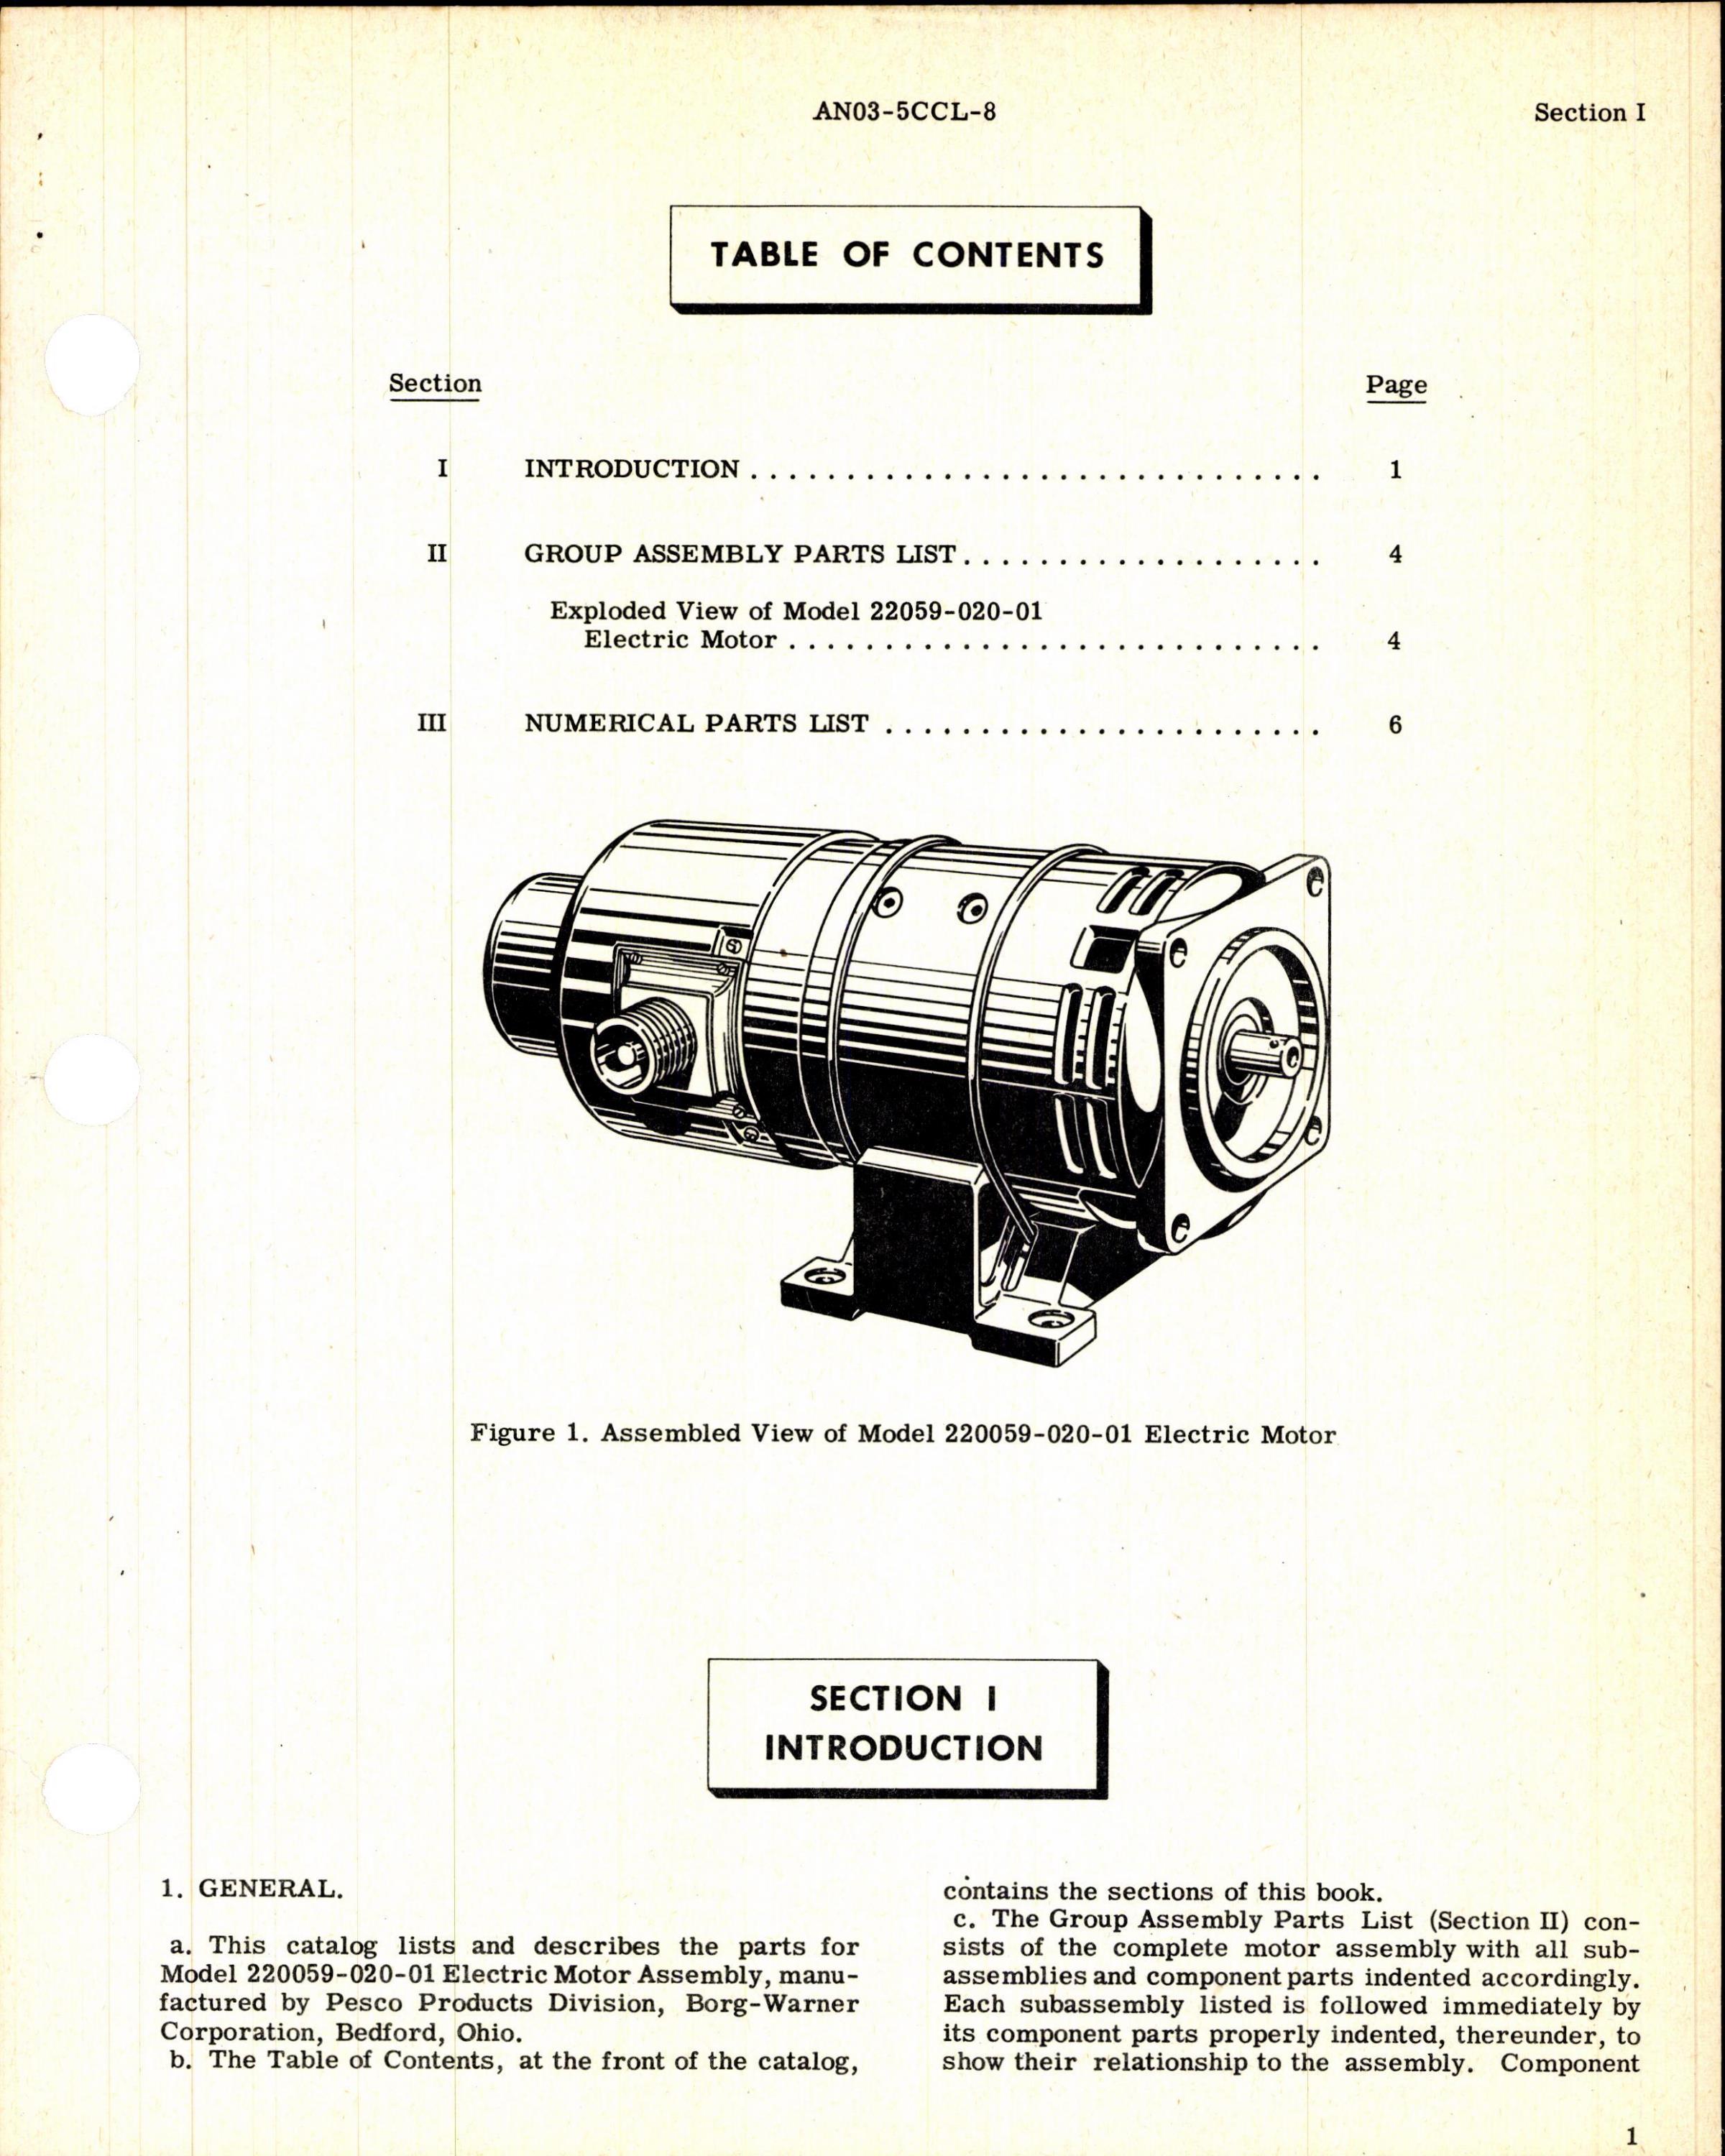 Sample page 3 from AirCorps Library document: Illustrated Parts Catalog for Pesco Electric Motor, Model 220059-020-01